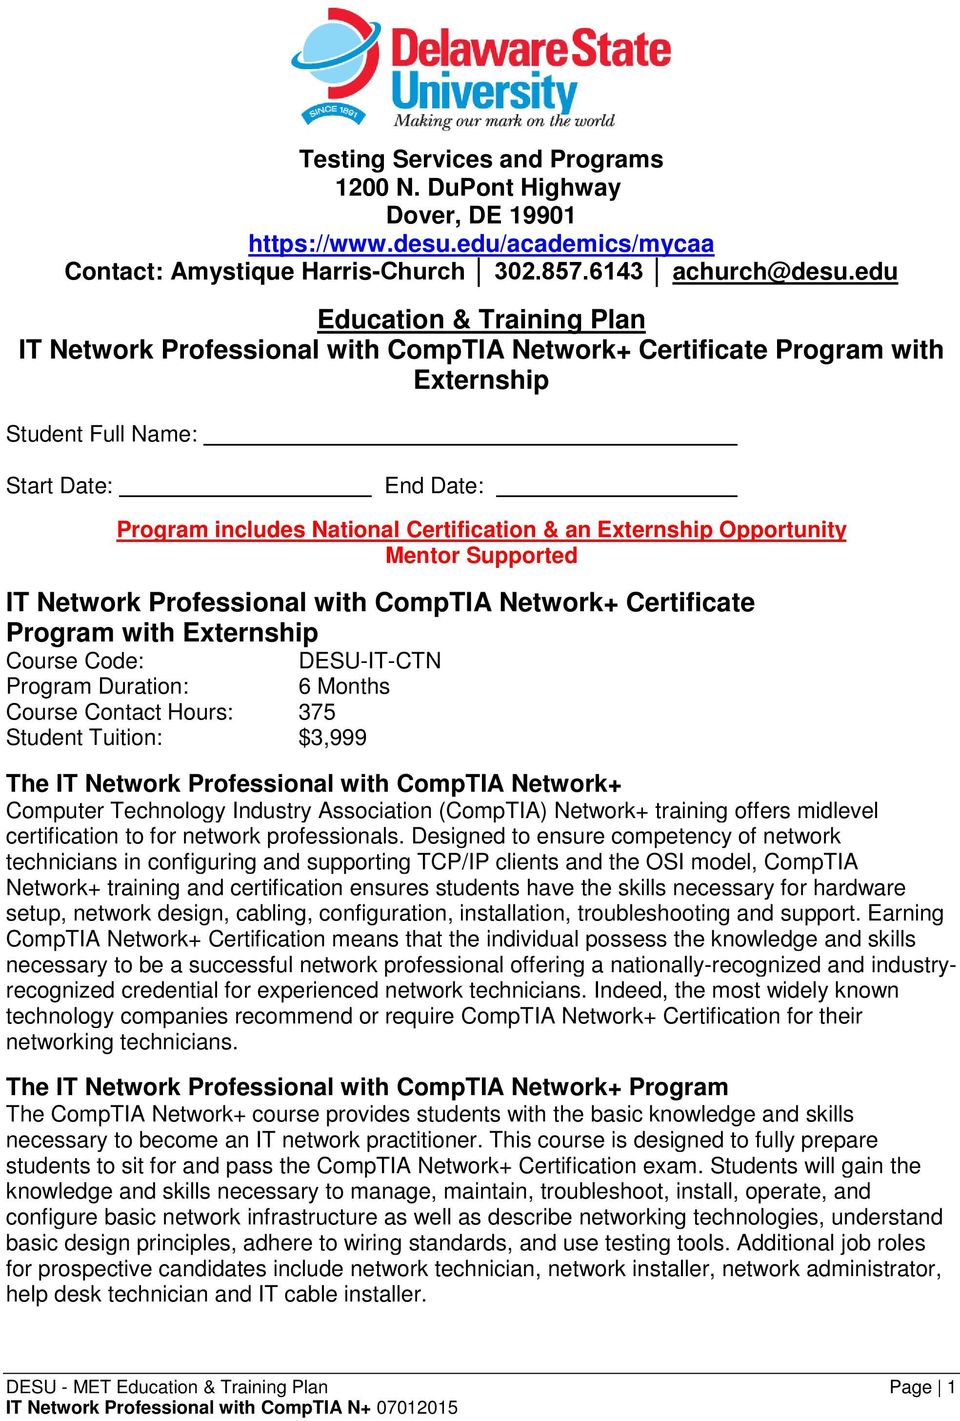 Externship Opportunity Mentor Supported IT Network Professional with CompTIA Network+ Certificate Program with Externship Course Code: DESU-IT-CTN Program Duration: 6 Months Course Contact Hours: 375